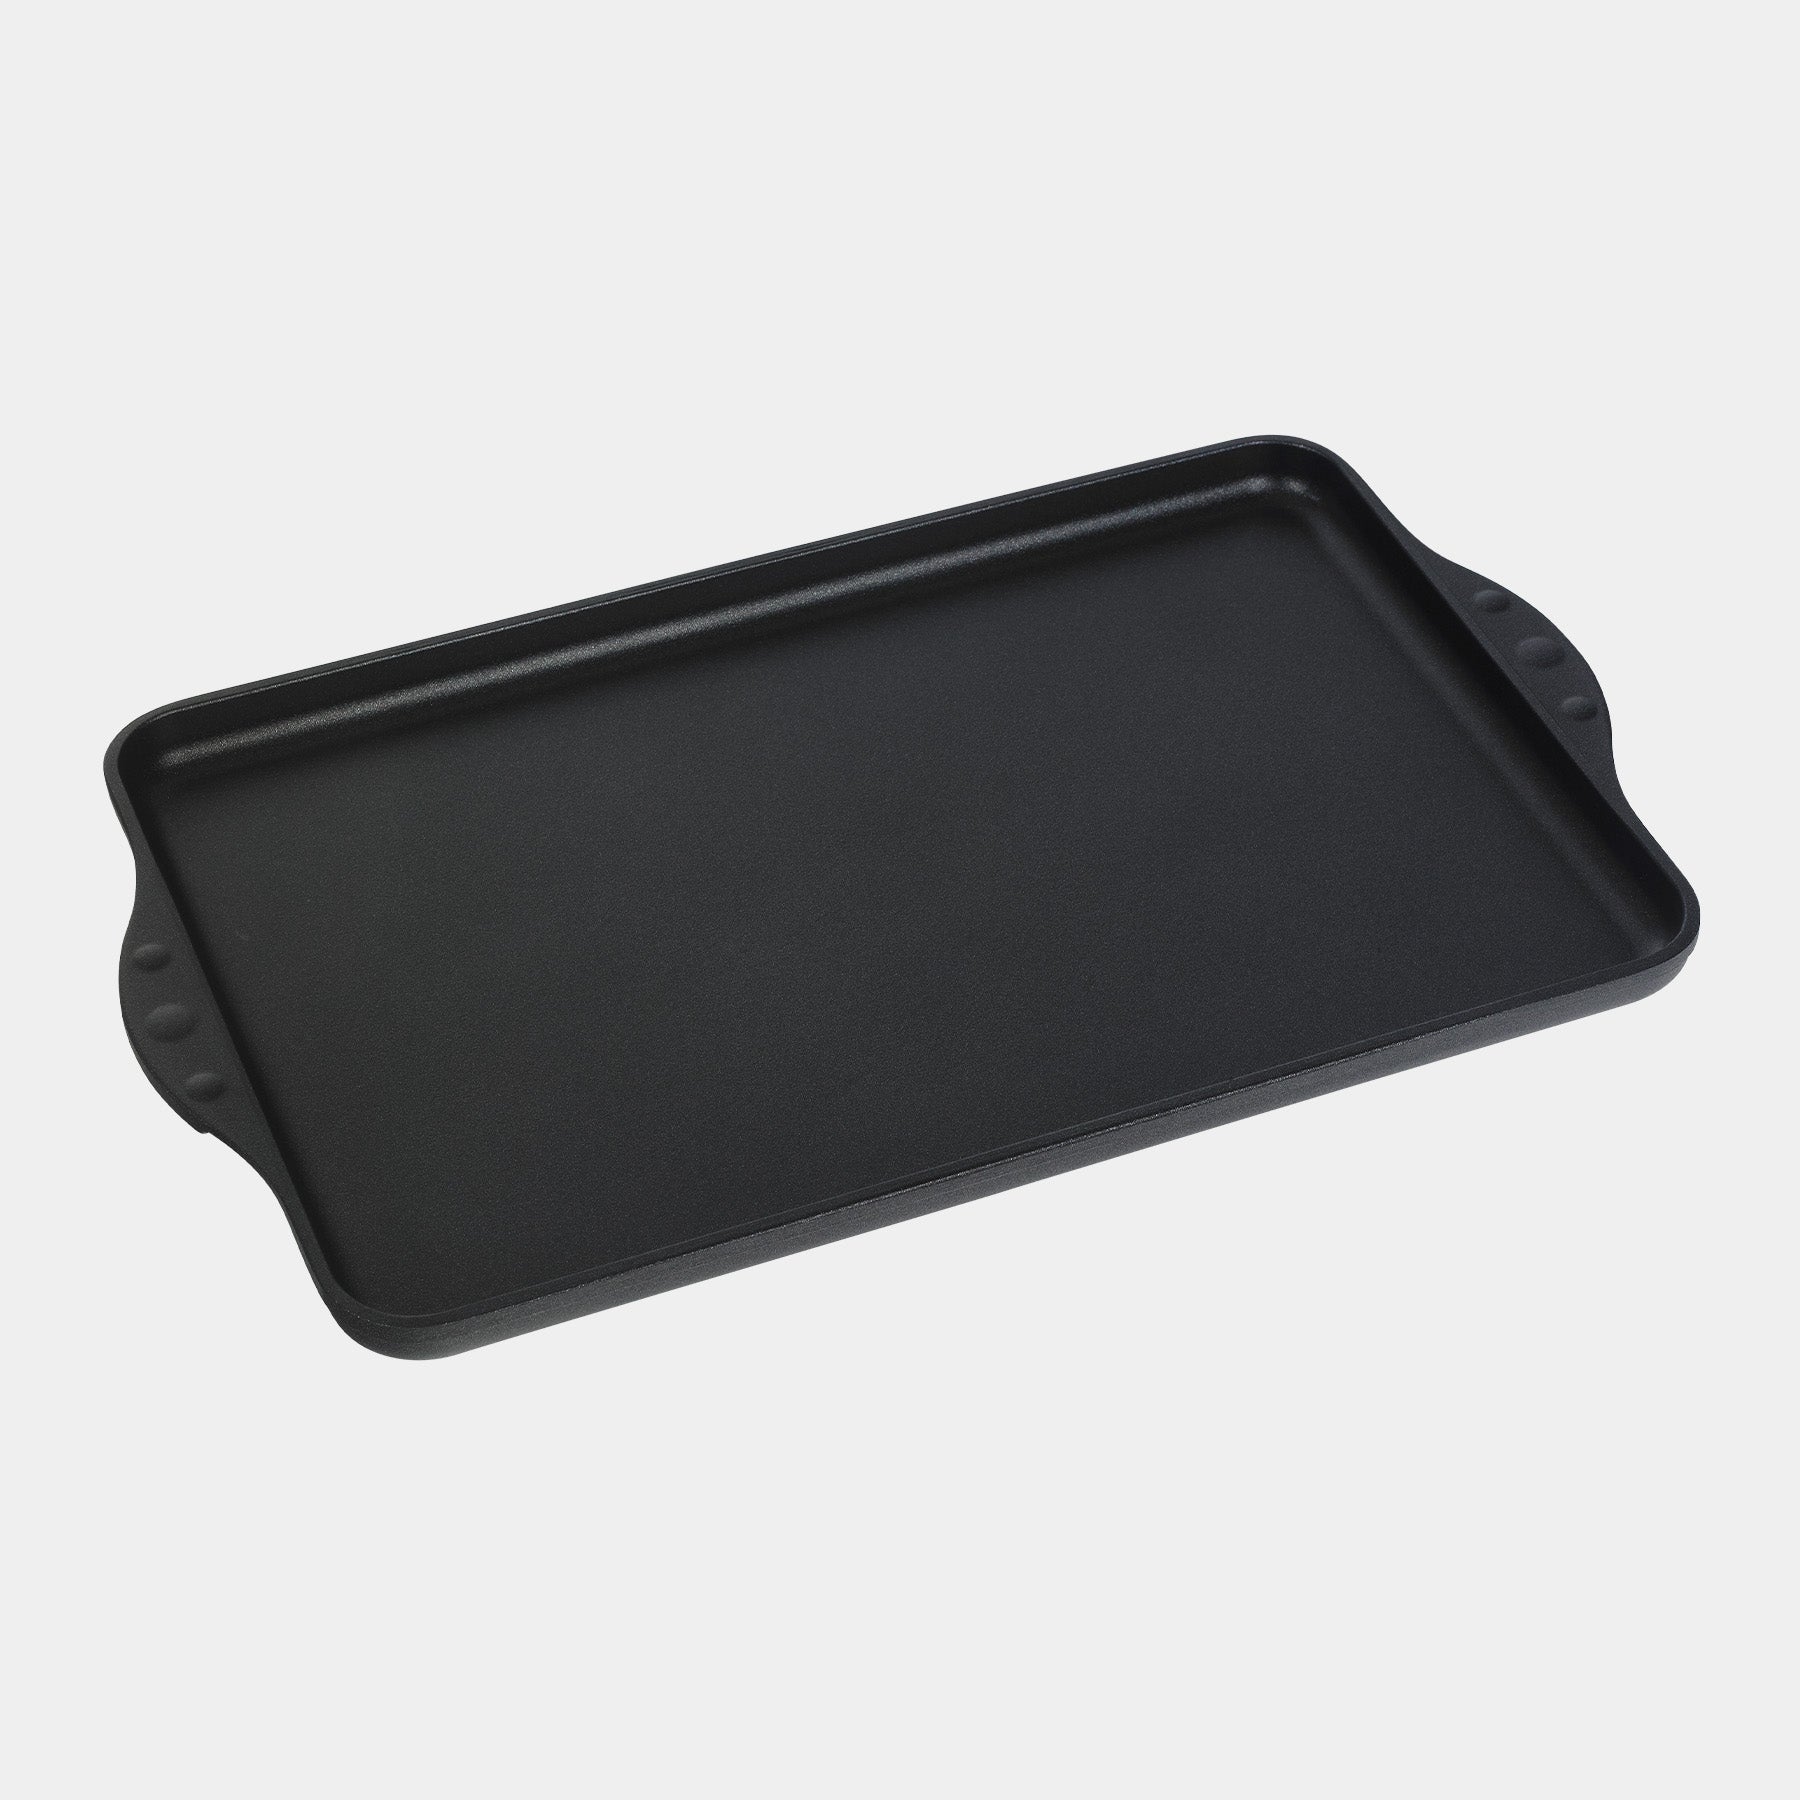 XD Nonstick 17" x 11" Double-Burner Griddle Top view